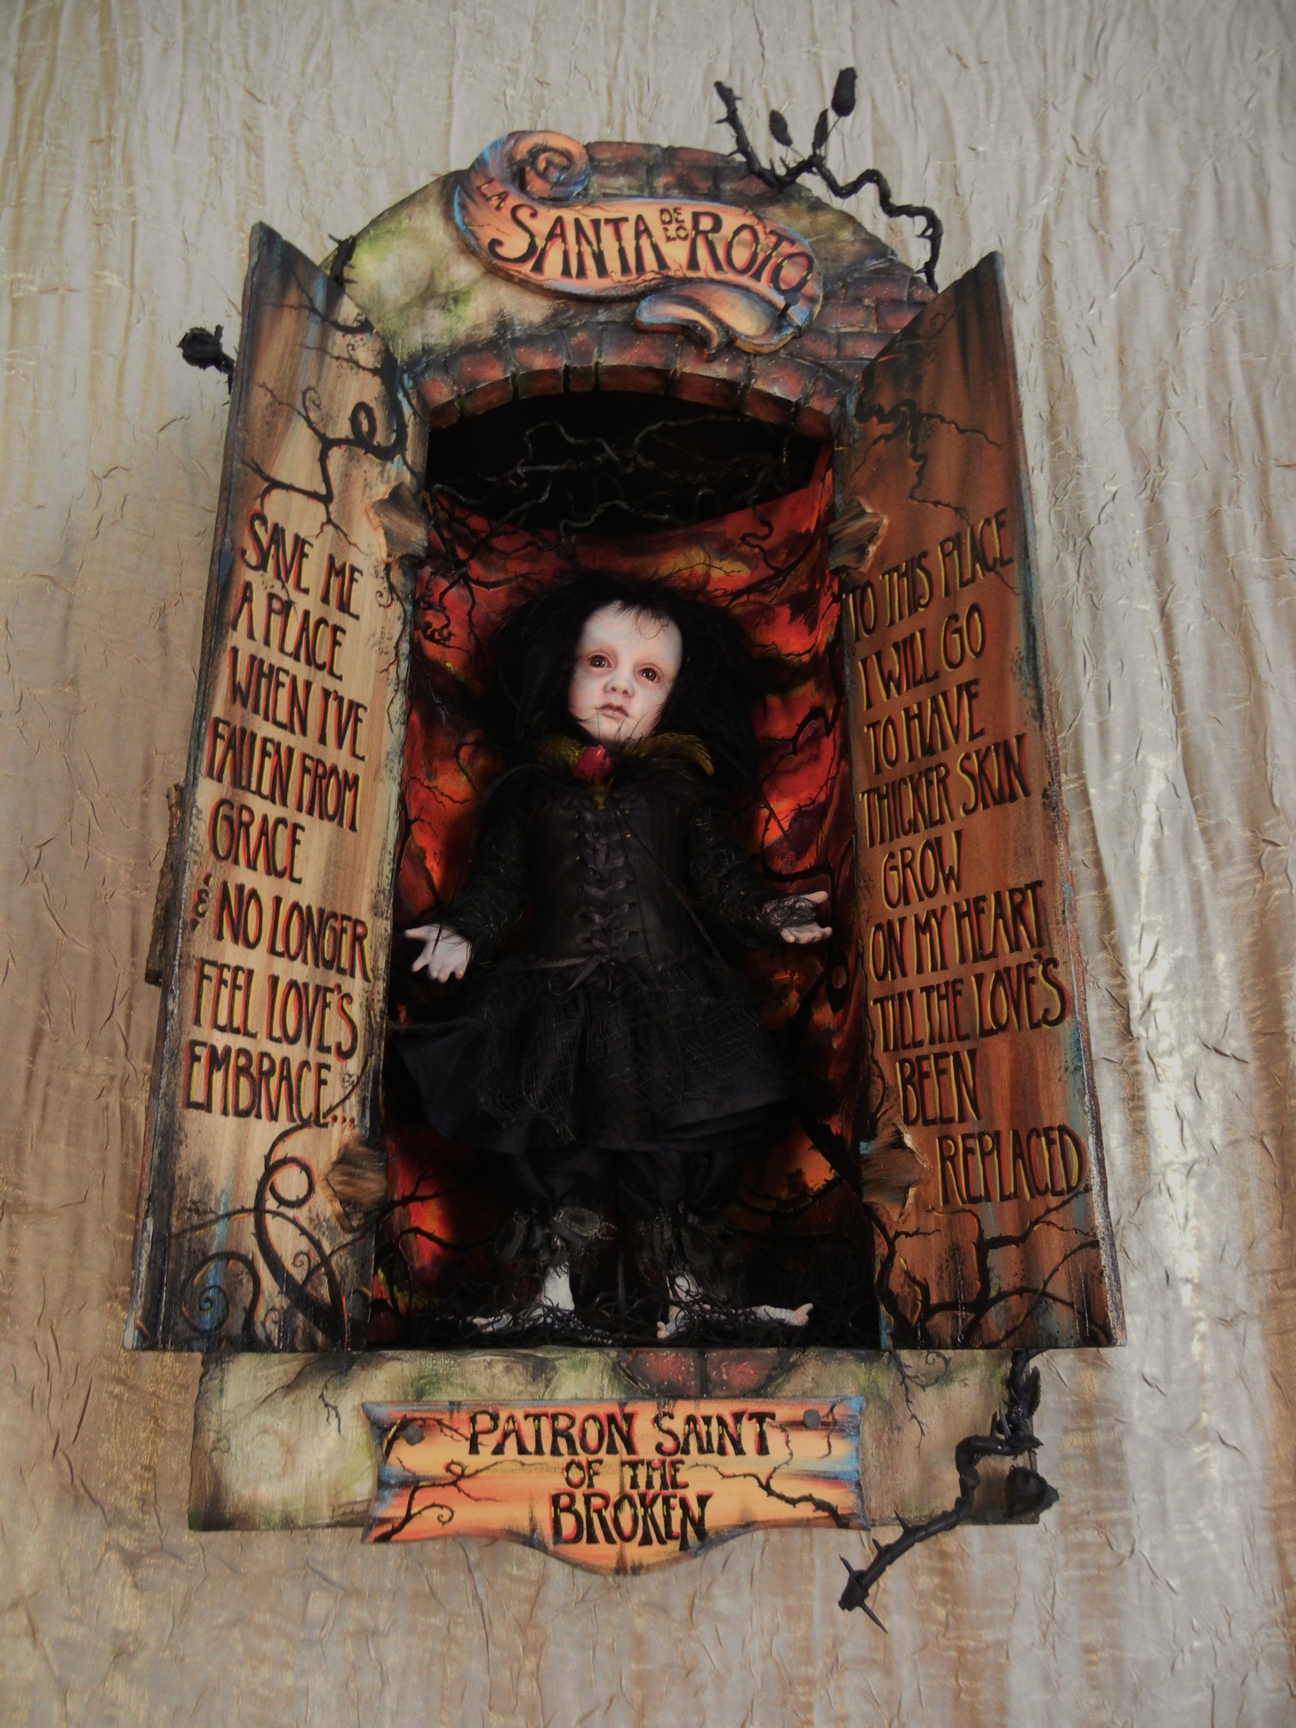 open mixed media cabinet reveals taxidermy artdoll assemblage pale doll with black hair wearing black goth